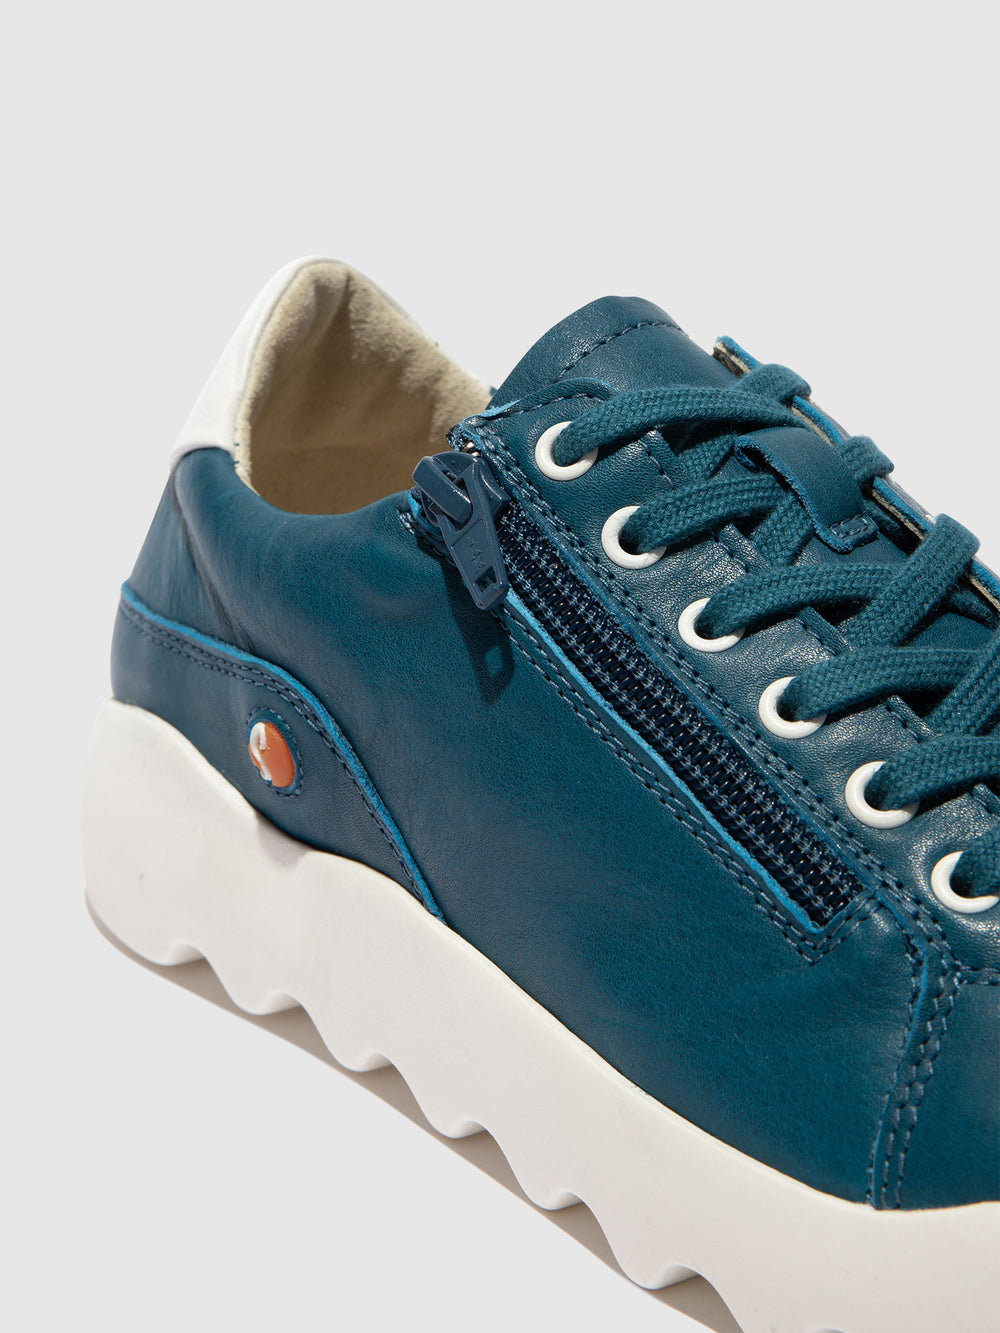 Lace-up Trainers WHIZ719SOF BLUE DENIM/WHITE